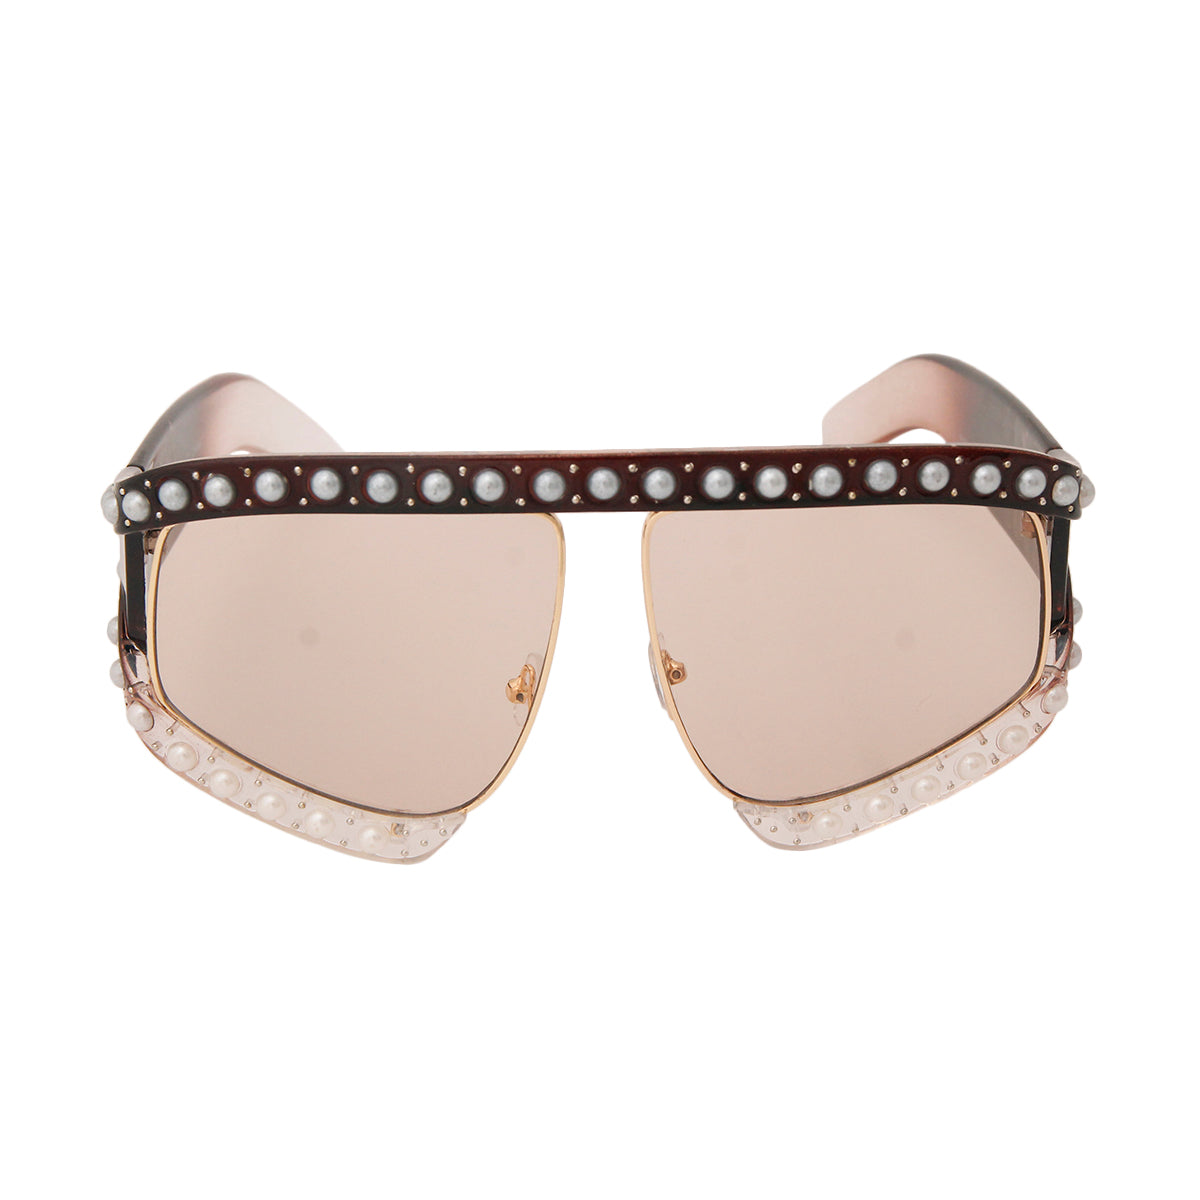 Brown and Pearl Sunglasses